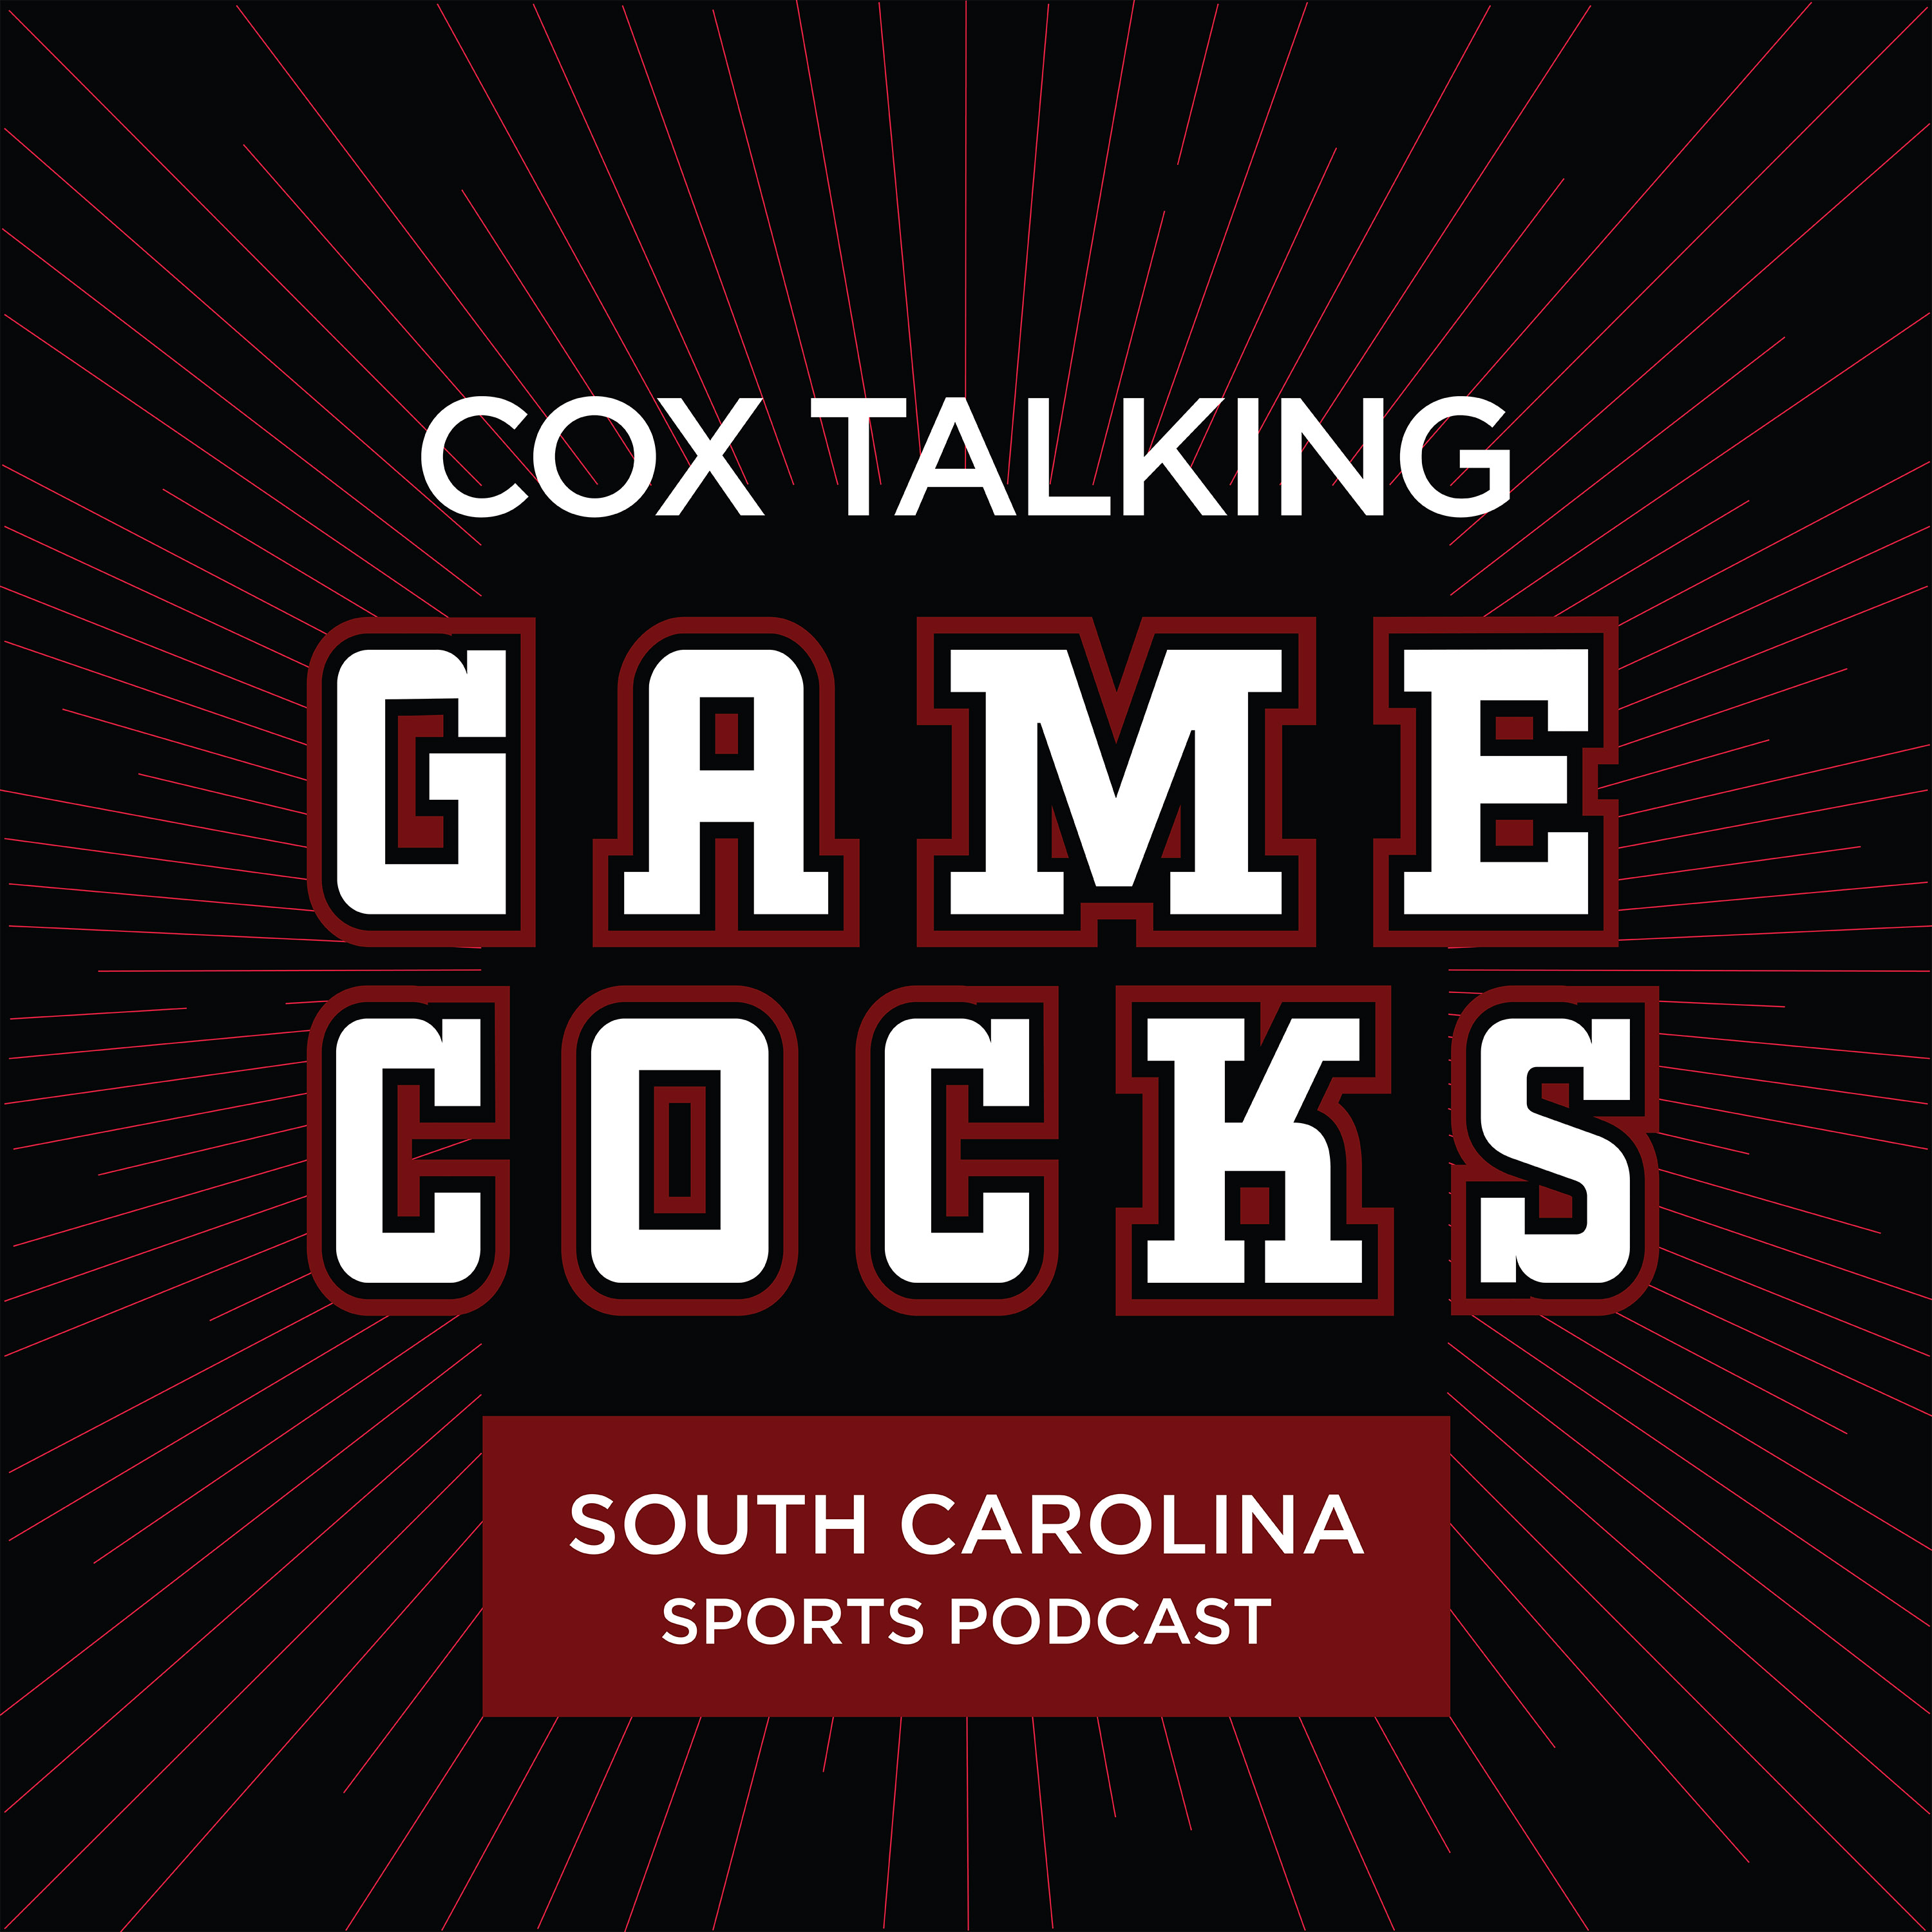 South Carolina Football Takes on Rival: Pregame Analysis, Storylines + USC Athletics Weekly Review